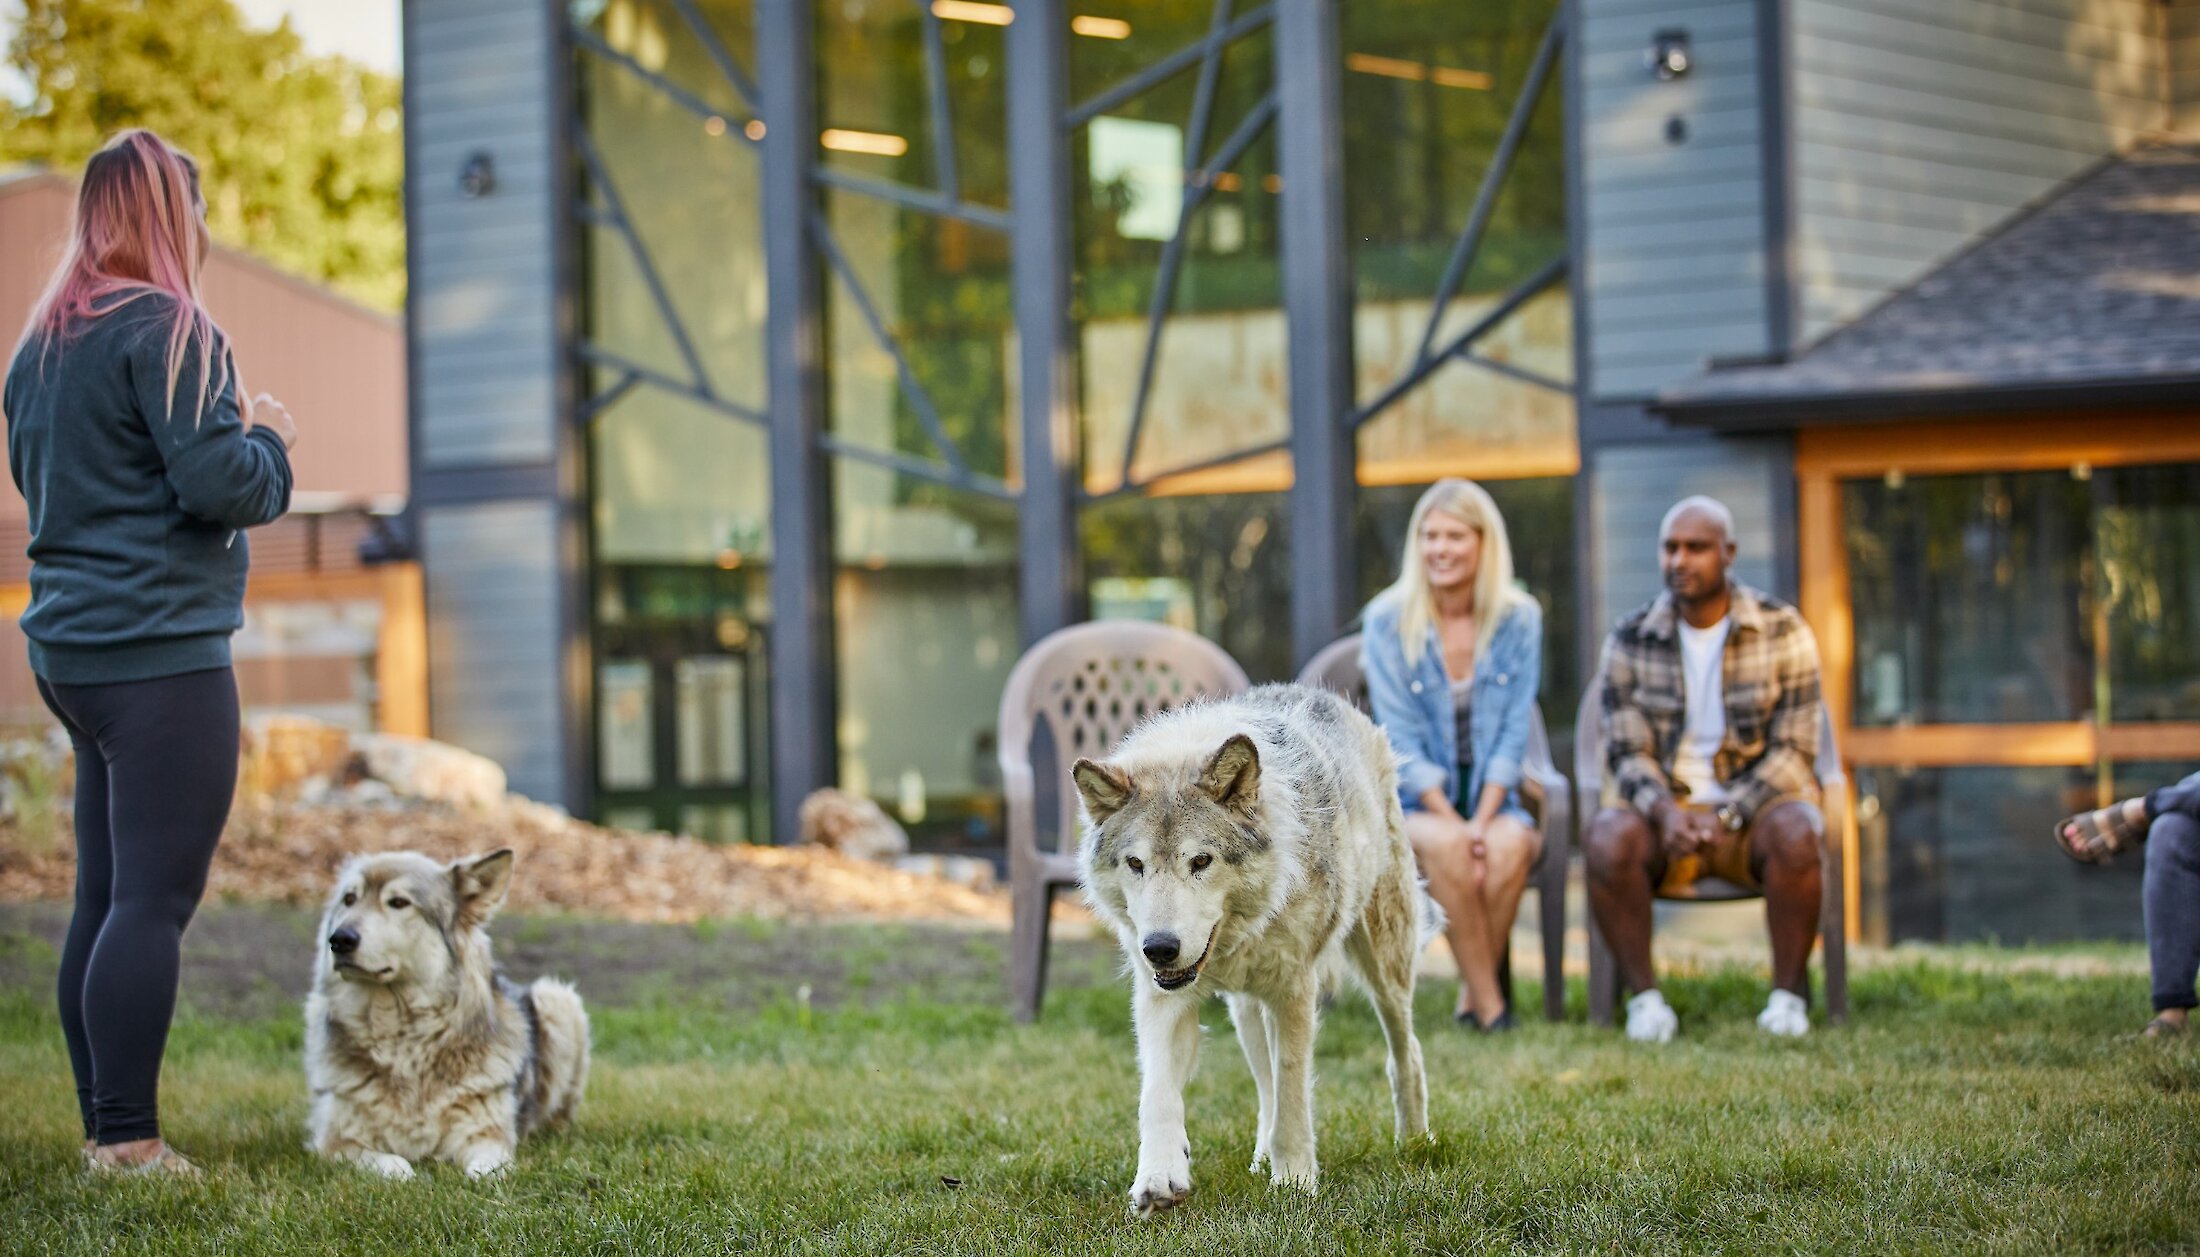 A couple enjoying the interactive wolfdog tour inside the enclosure with the wolfdogs